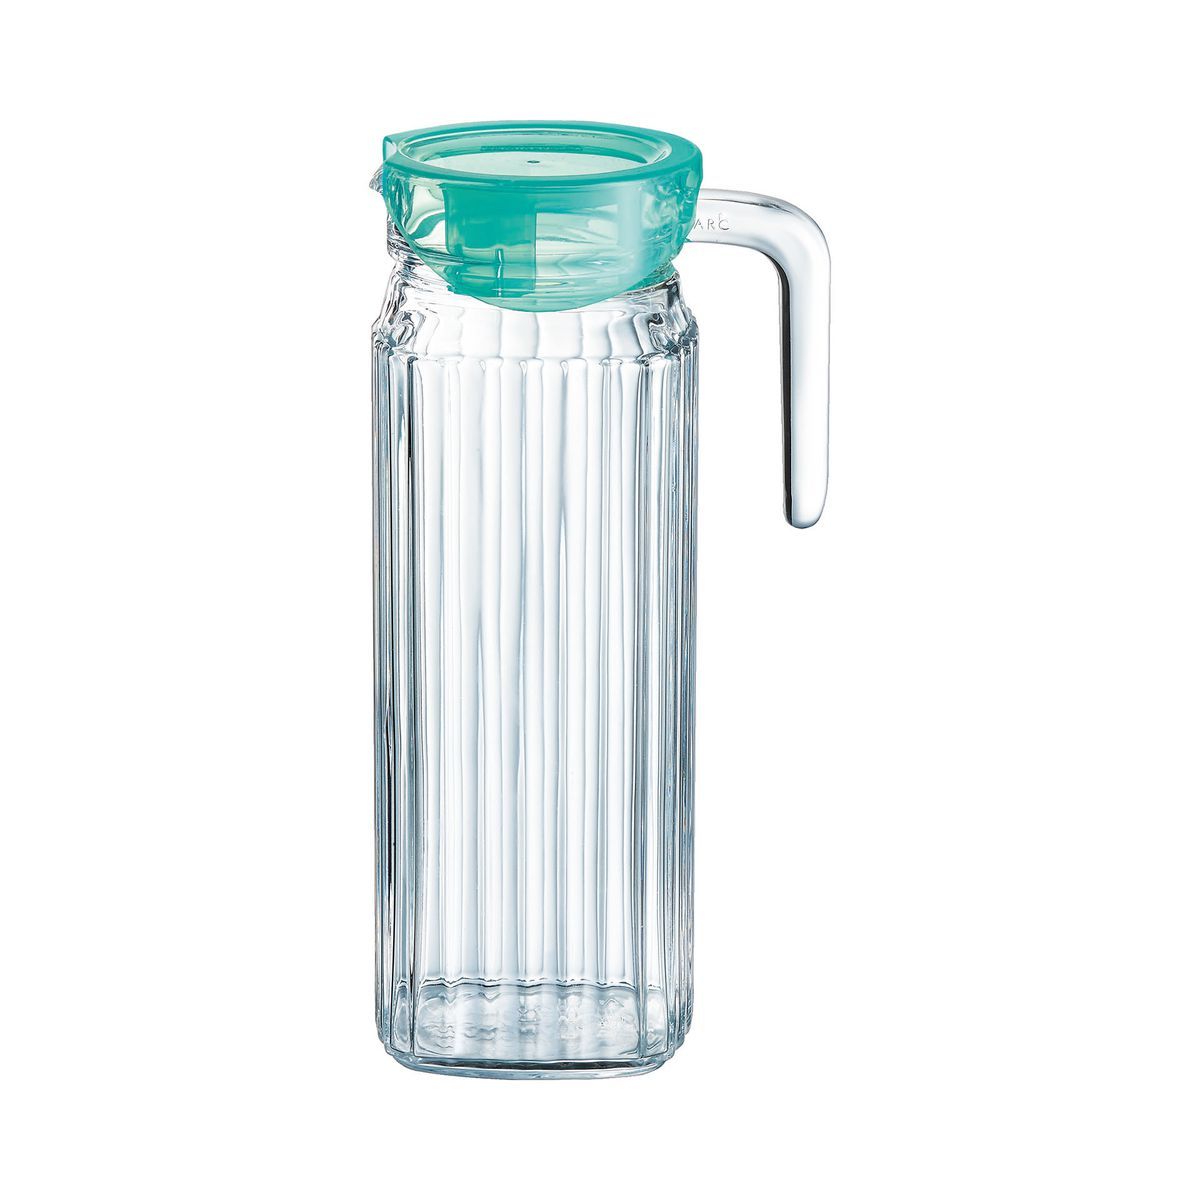 Luminarc 1L Water Jug Glass With Acrylic Lid Durable Jugs @ Best